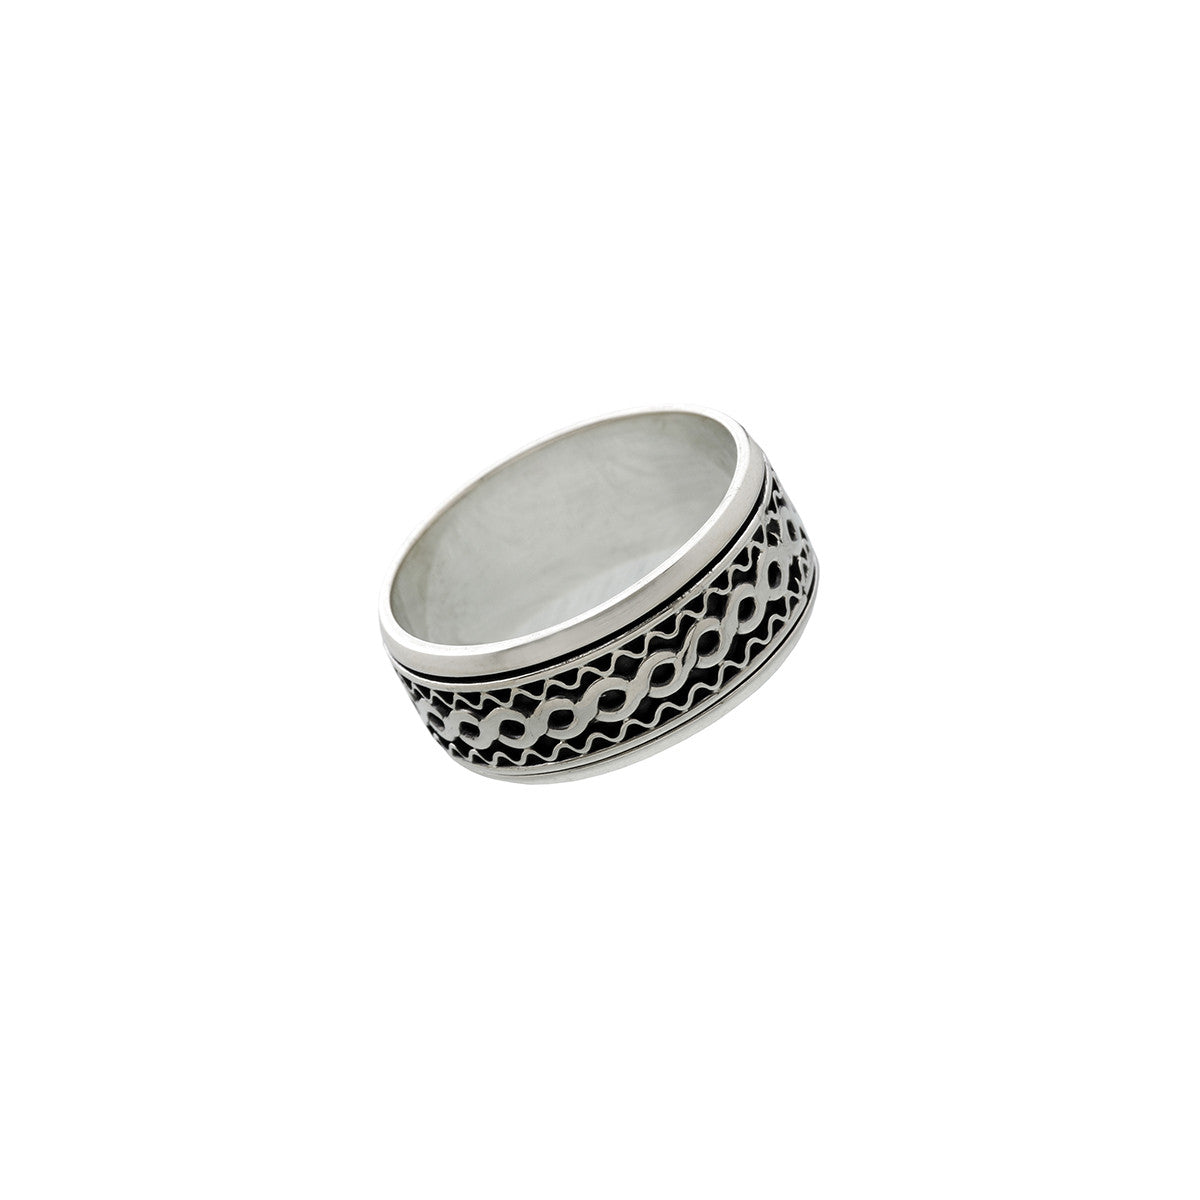 Alpha Infinity Sterling Silver Spin Ring - Cynthia Gale New York Jewelry